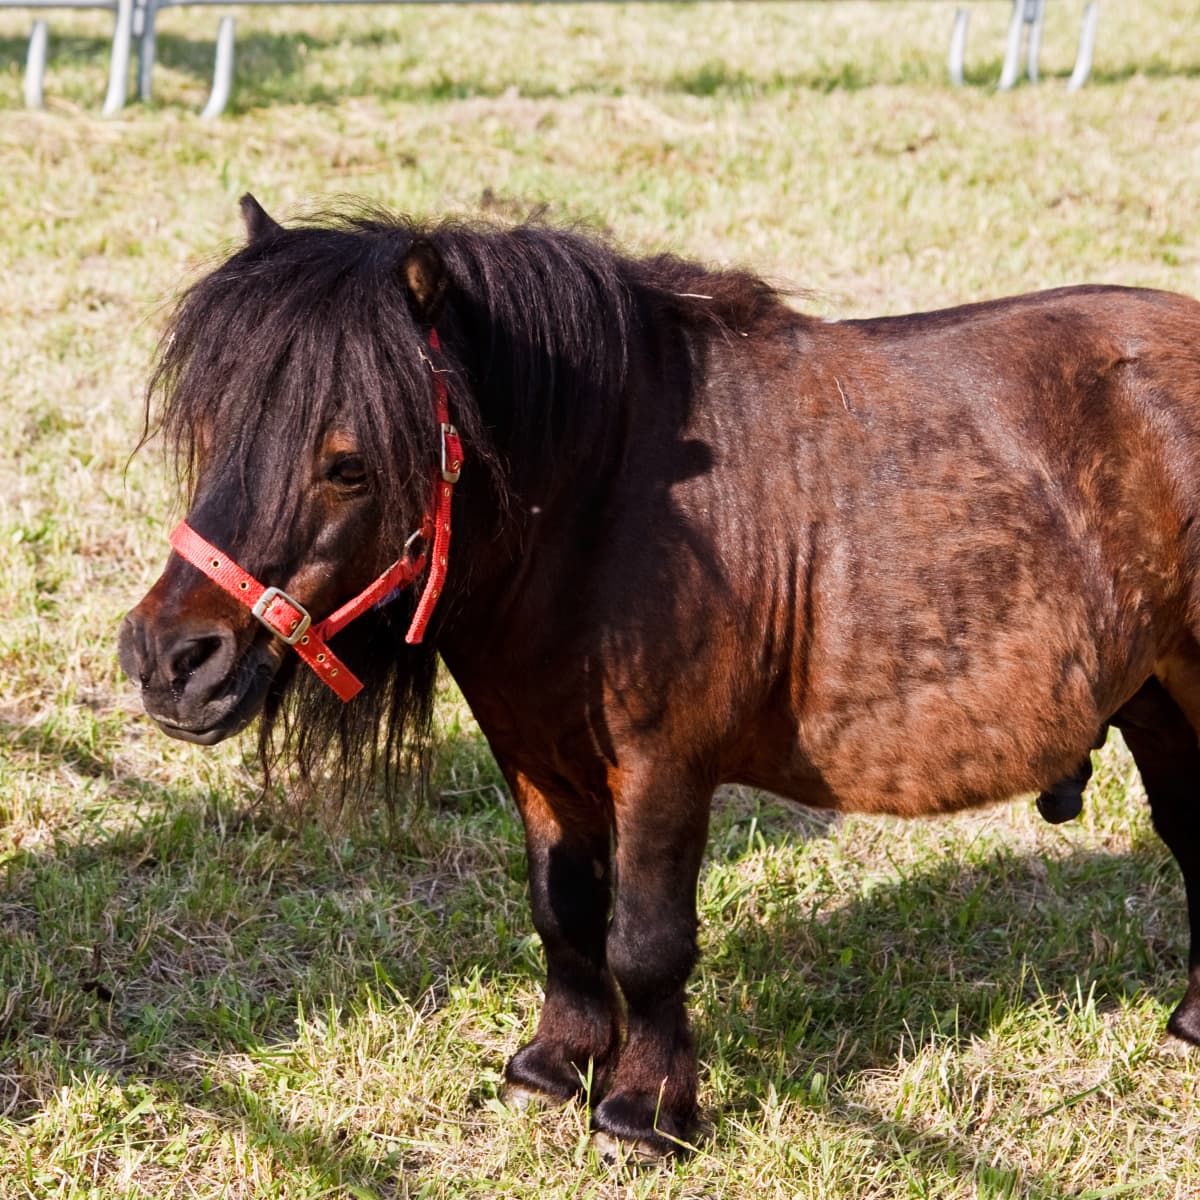 Such a sweetheart': Beacon Hill Children's Farm mourns loss of beloved  miniature horse